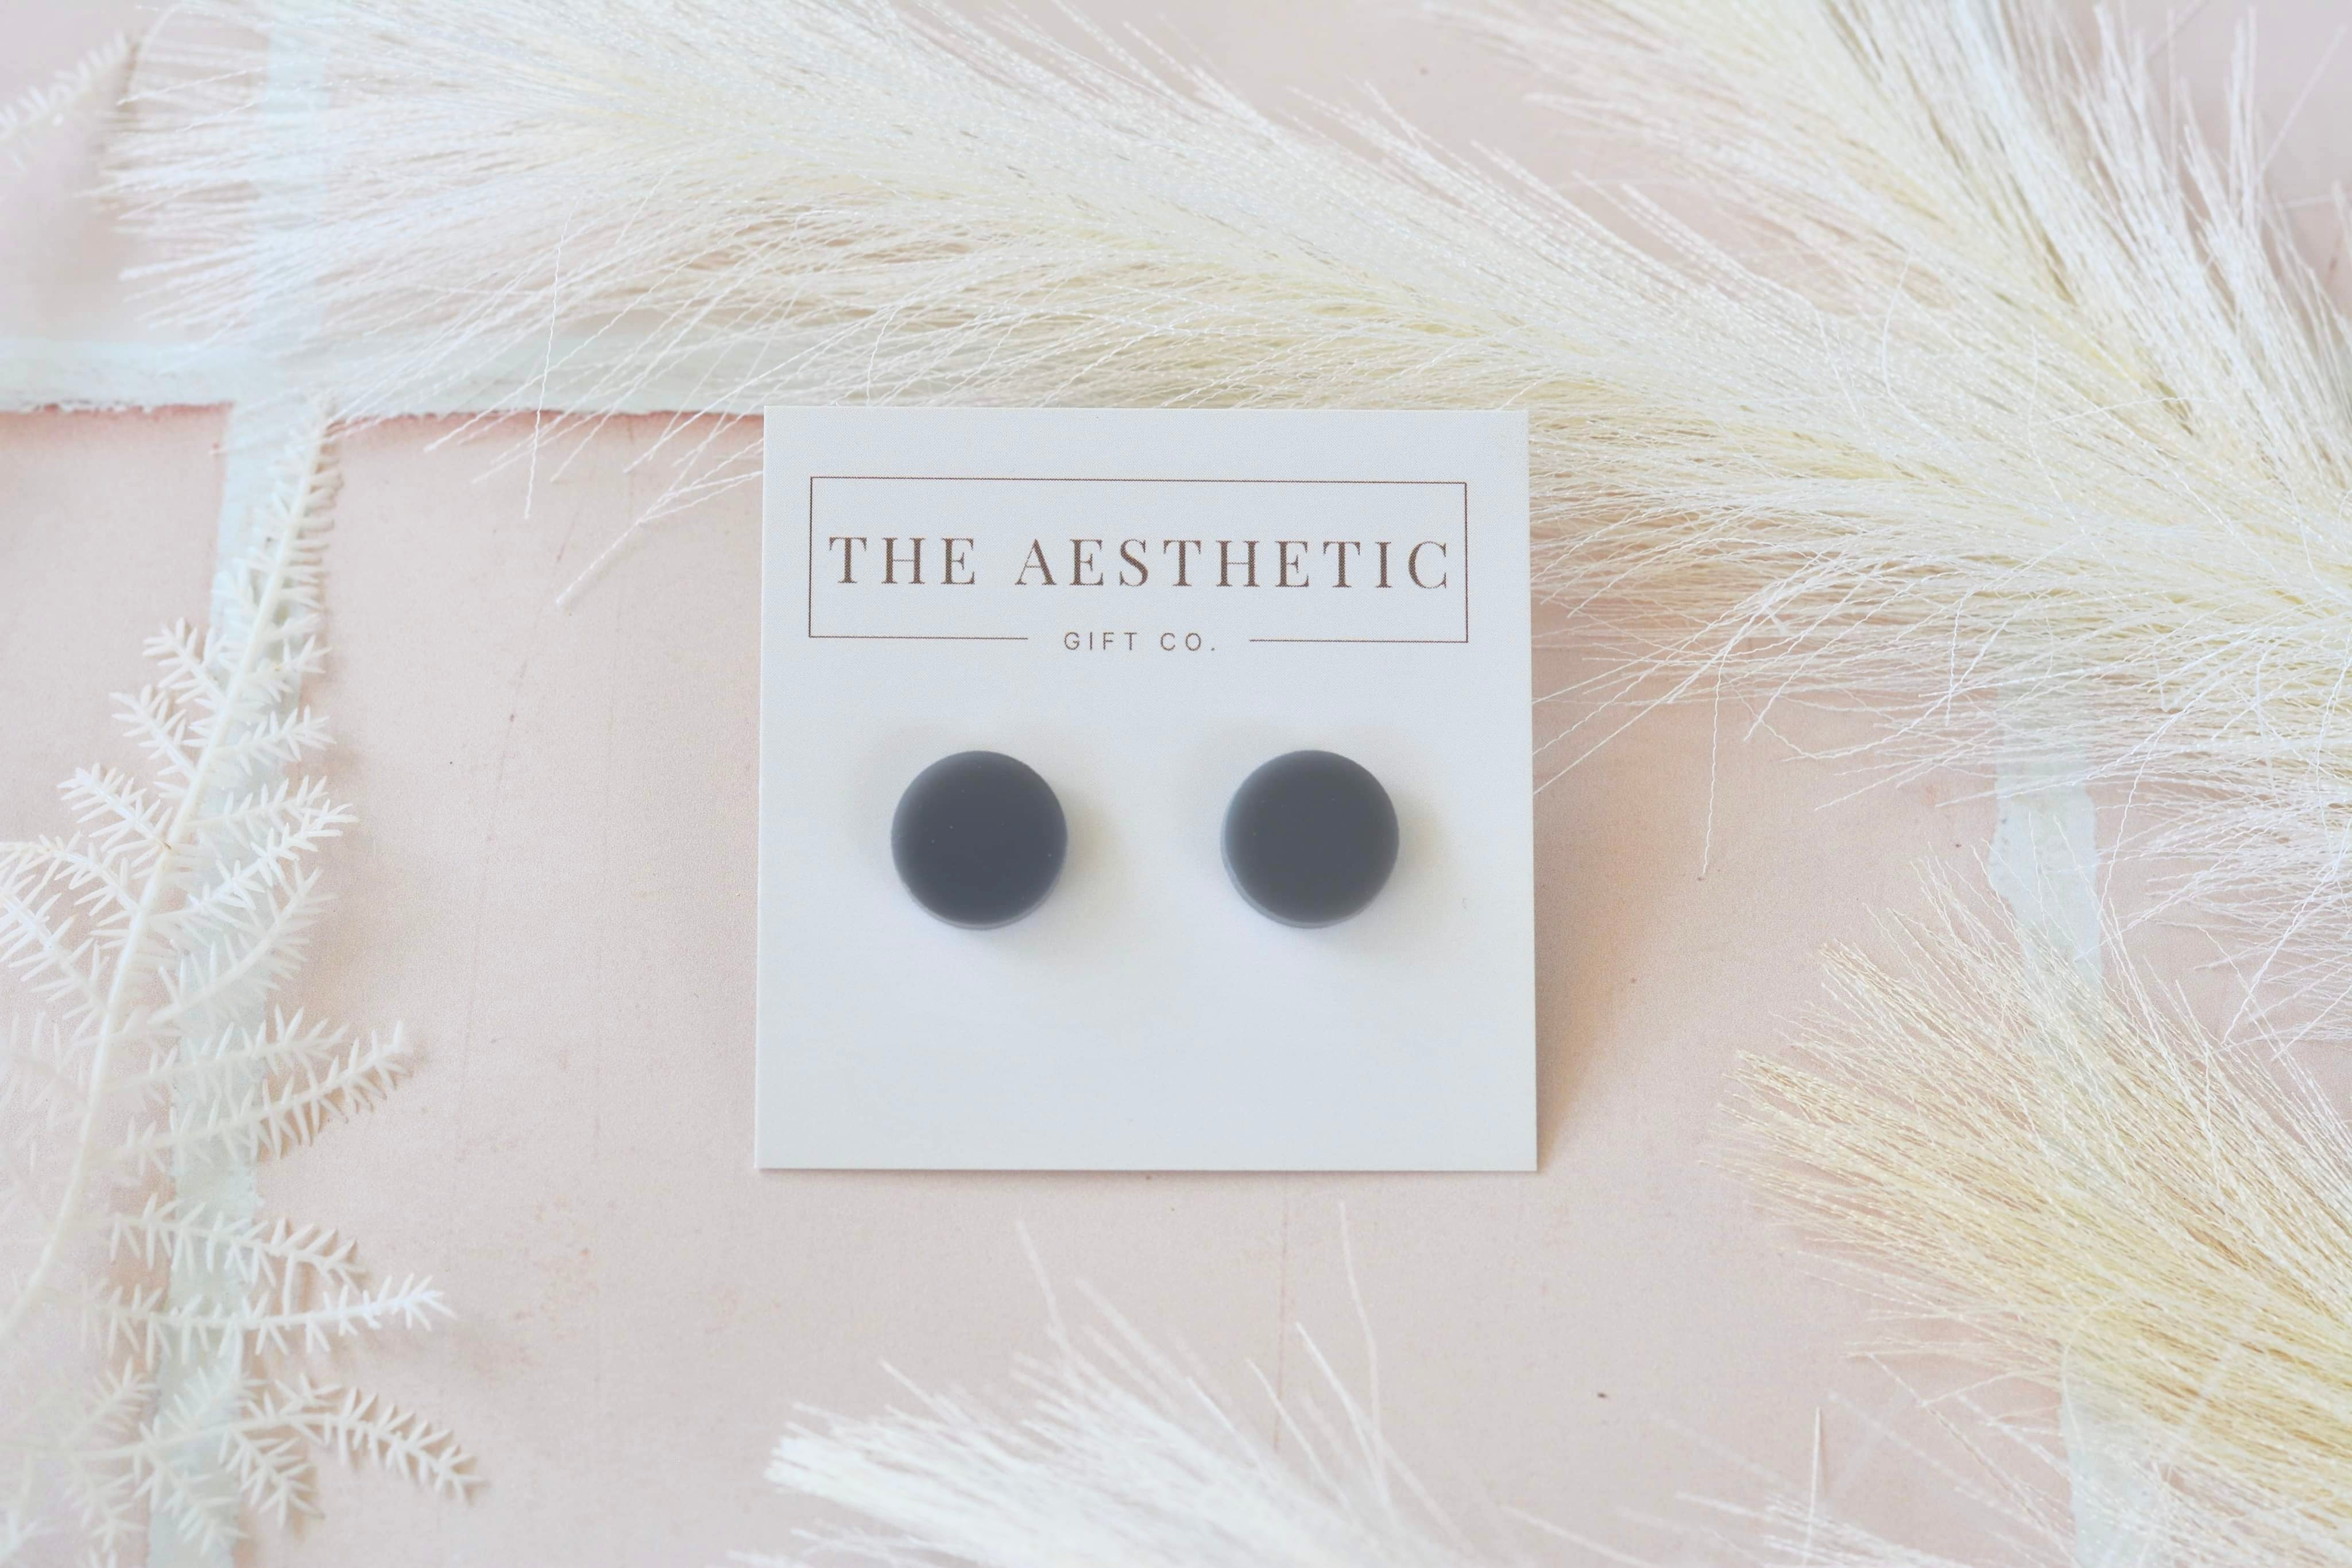 The Aesthetic Gift Co